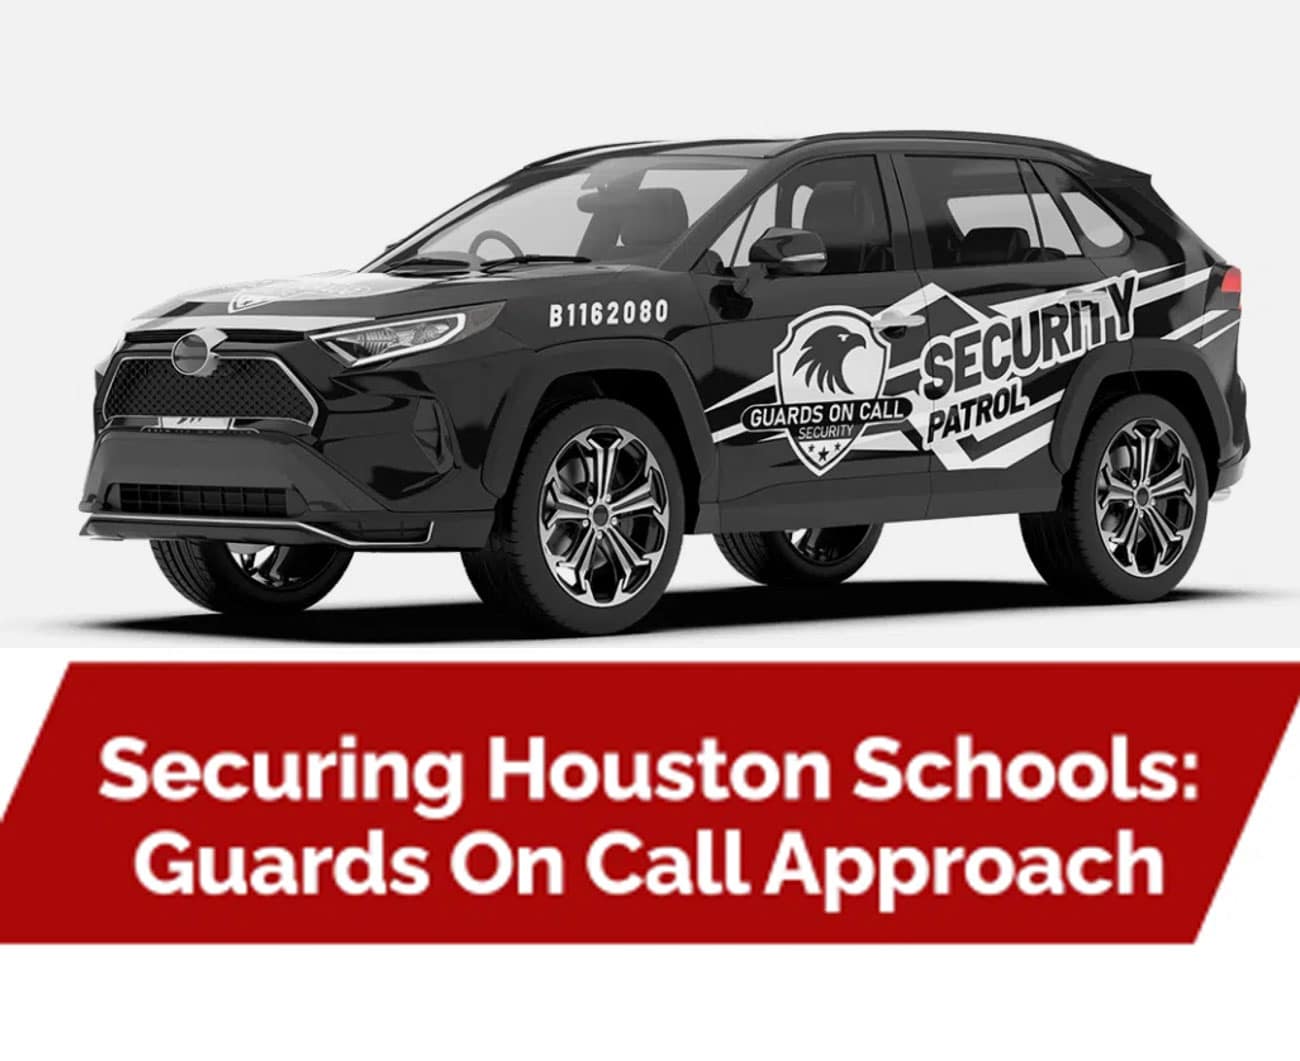 Securing Houston Schools: Guards On Call Approach